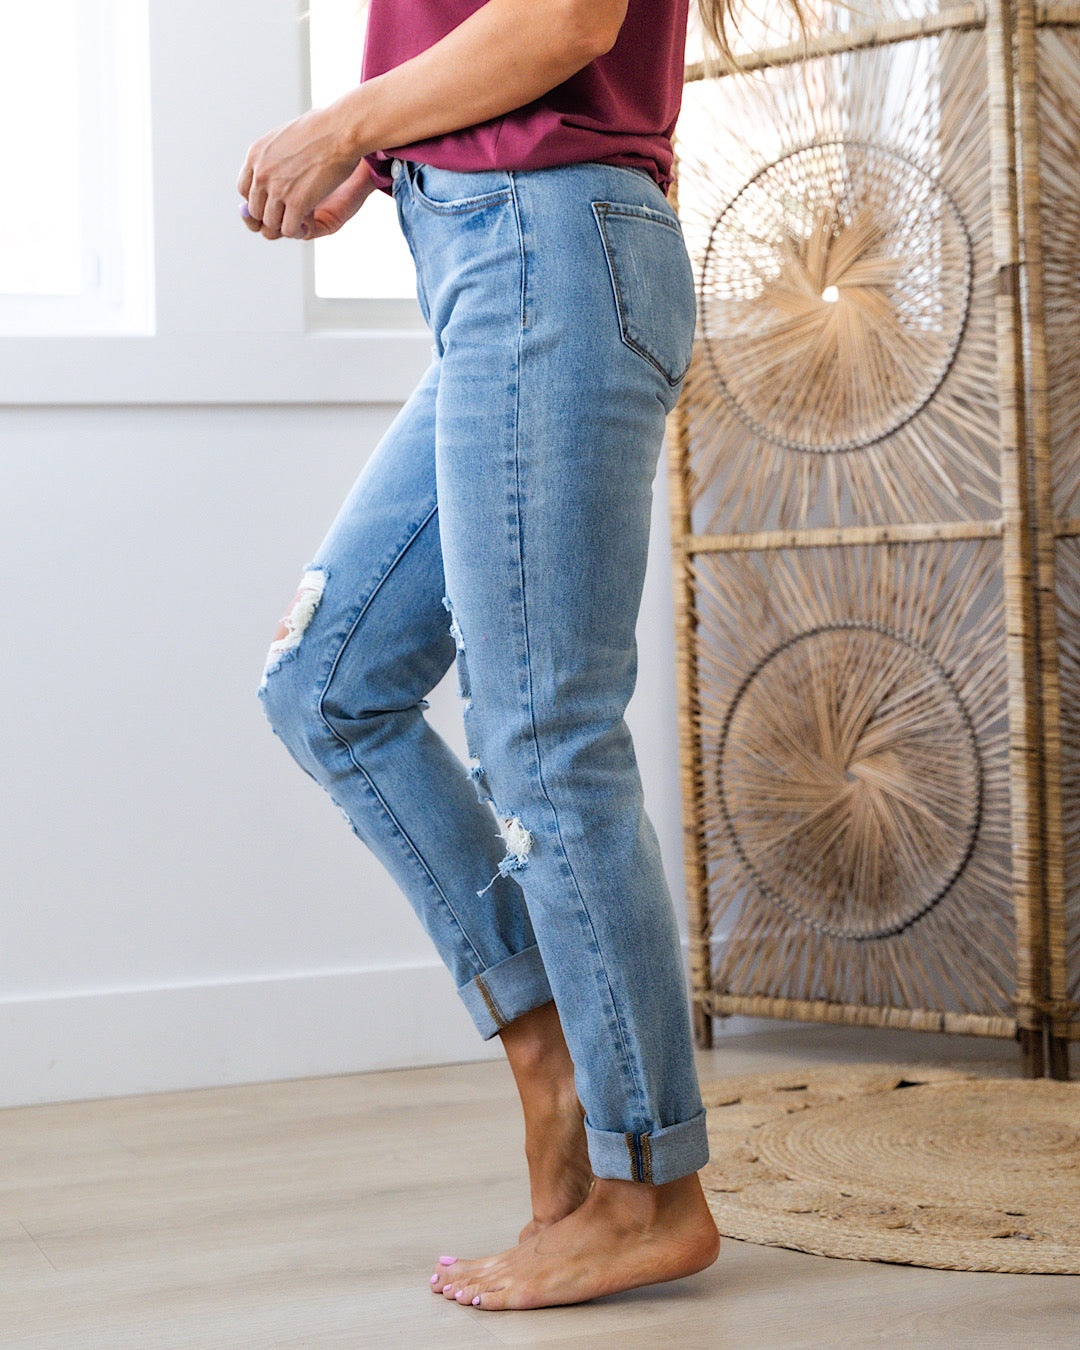 NEW! KanCan In Plain Sight Distressed Mom Jeans  KanCan   